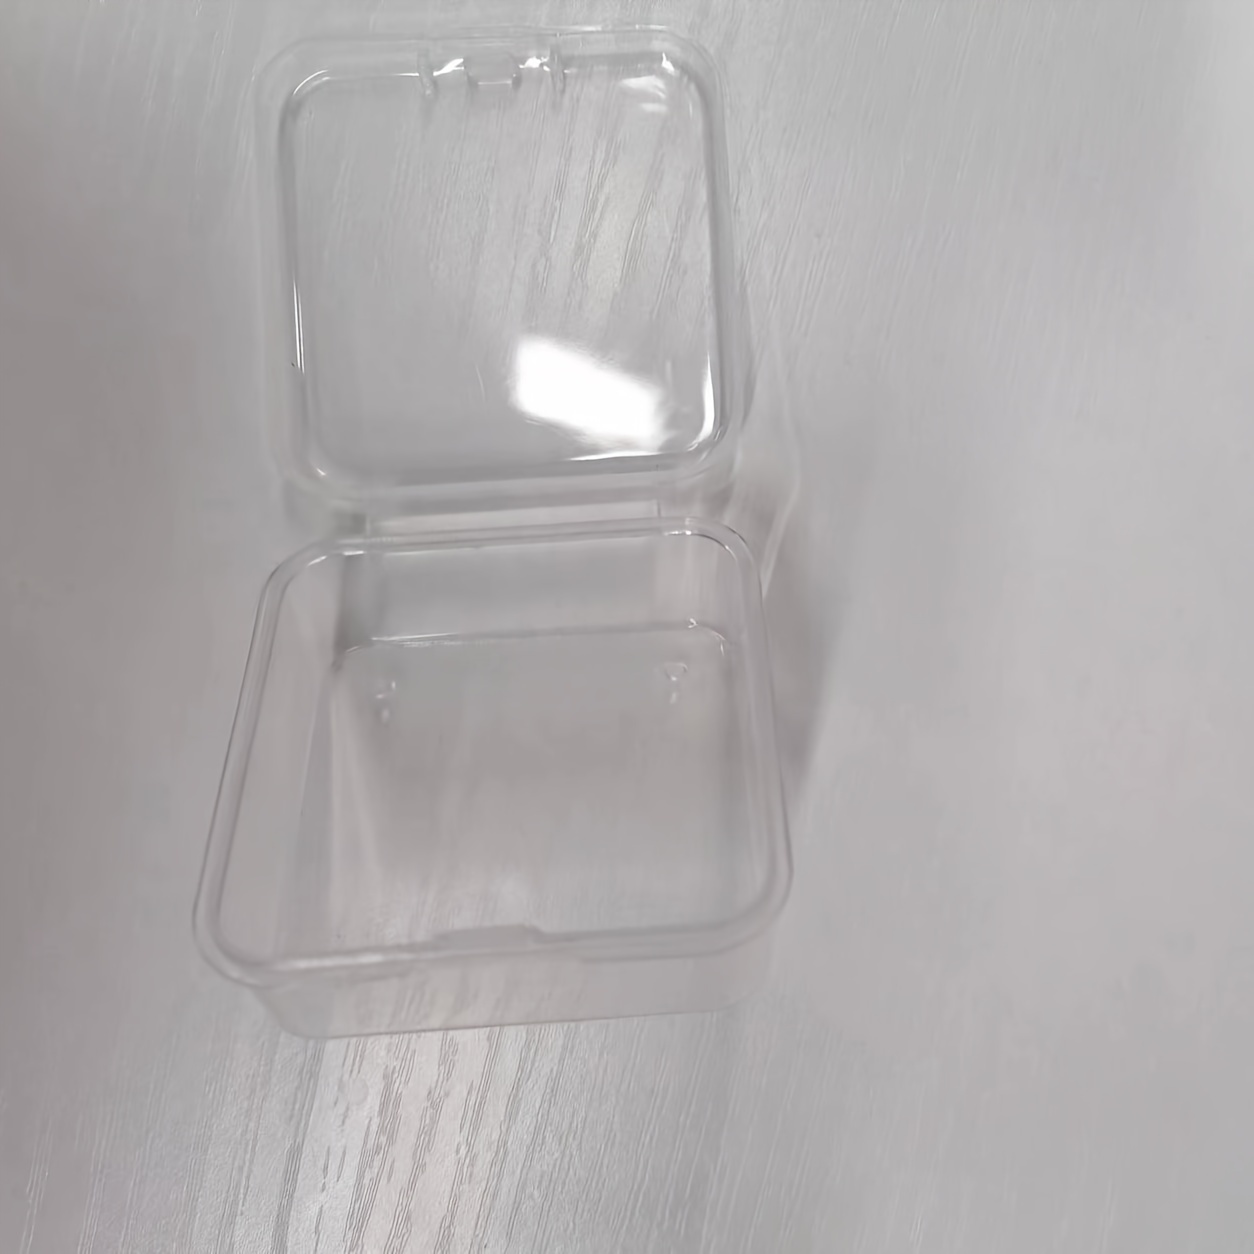 16 Pack Small Containers Clear Plastic Boxes Beads Storage